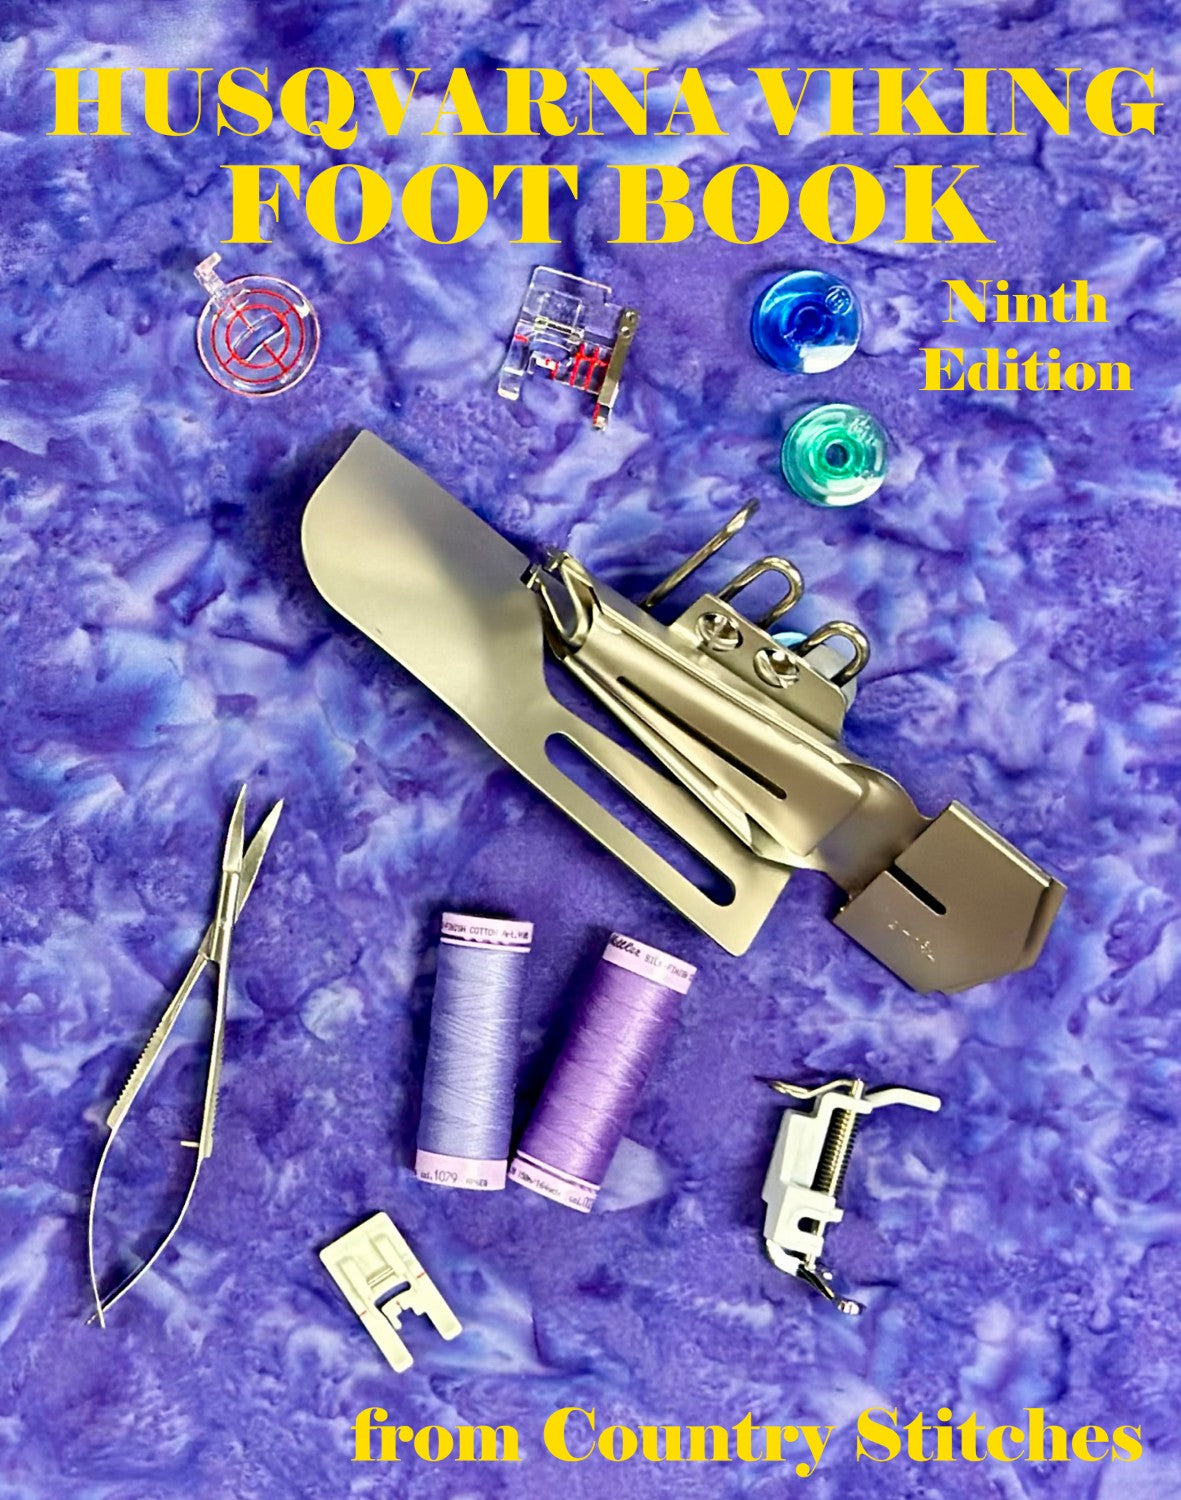 The Foot Book for Husqvarna Viking Sewing Machines Ninth Edition from Country Stitches